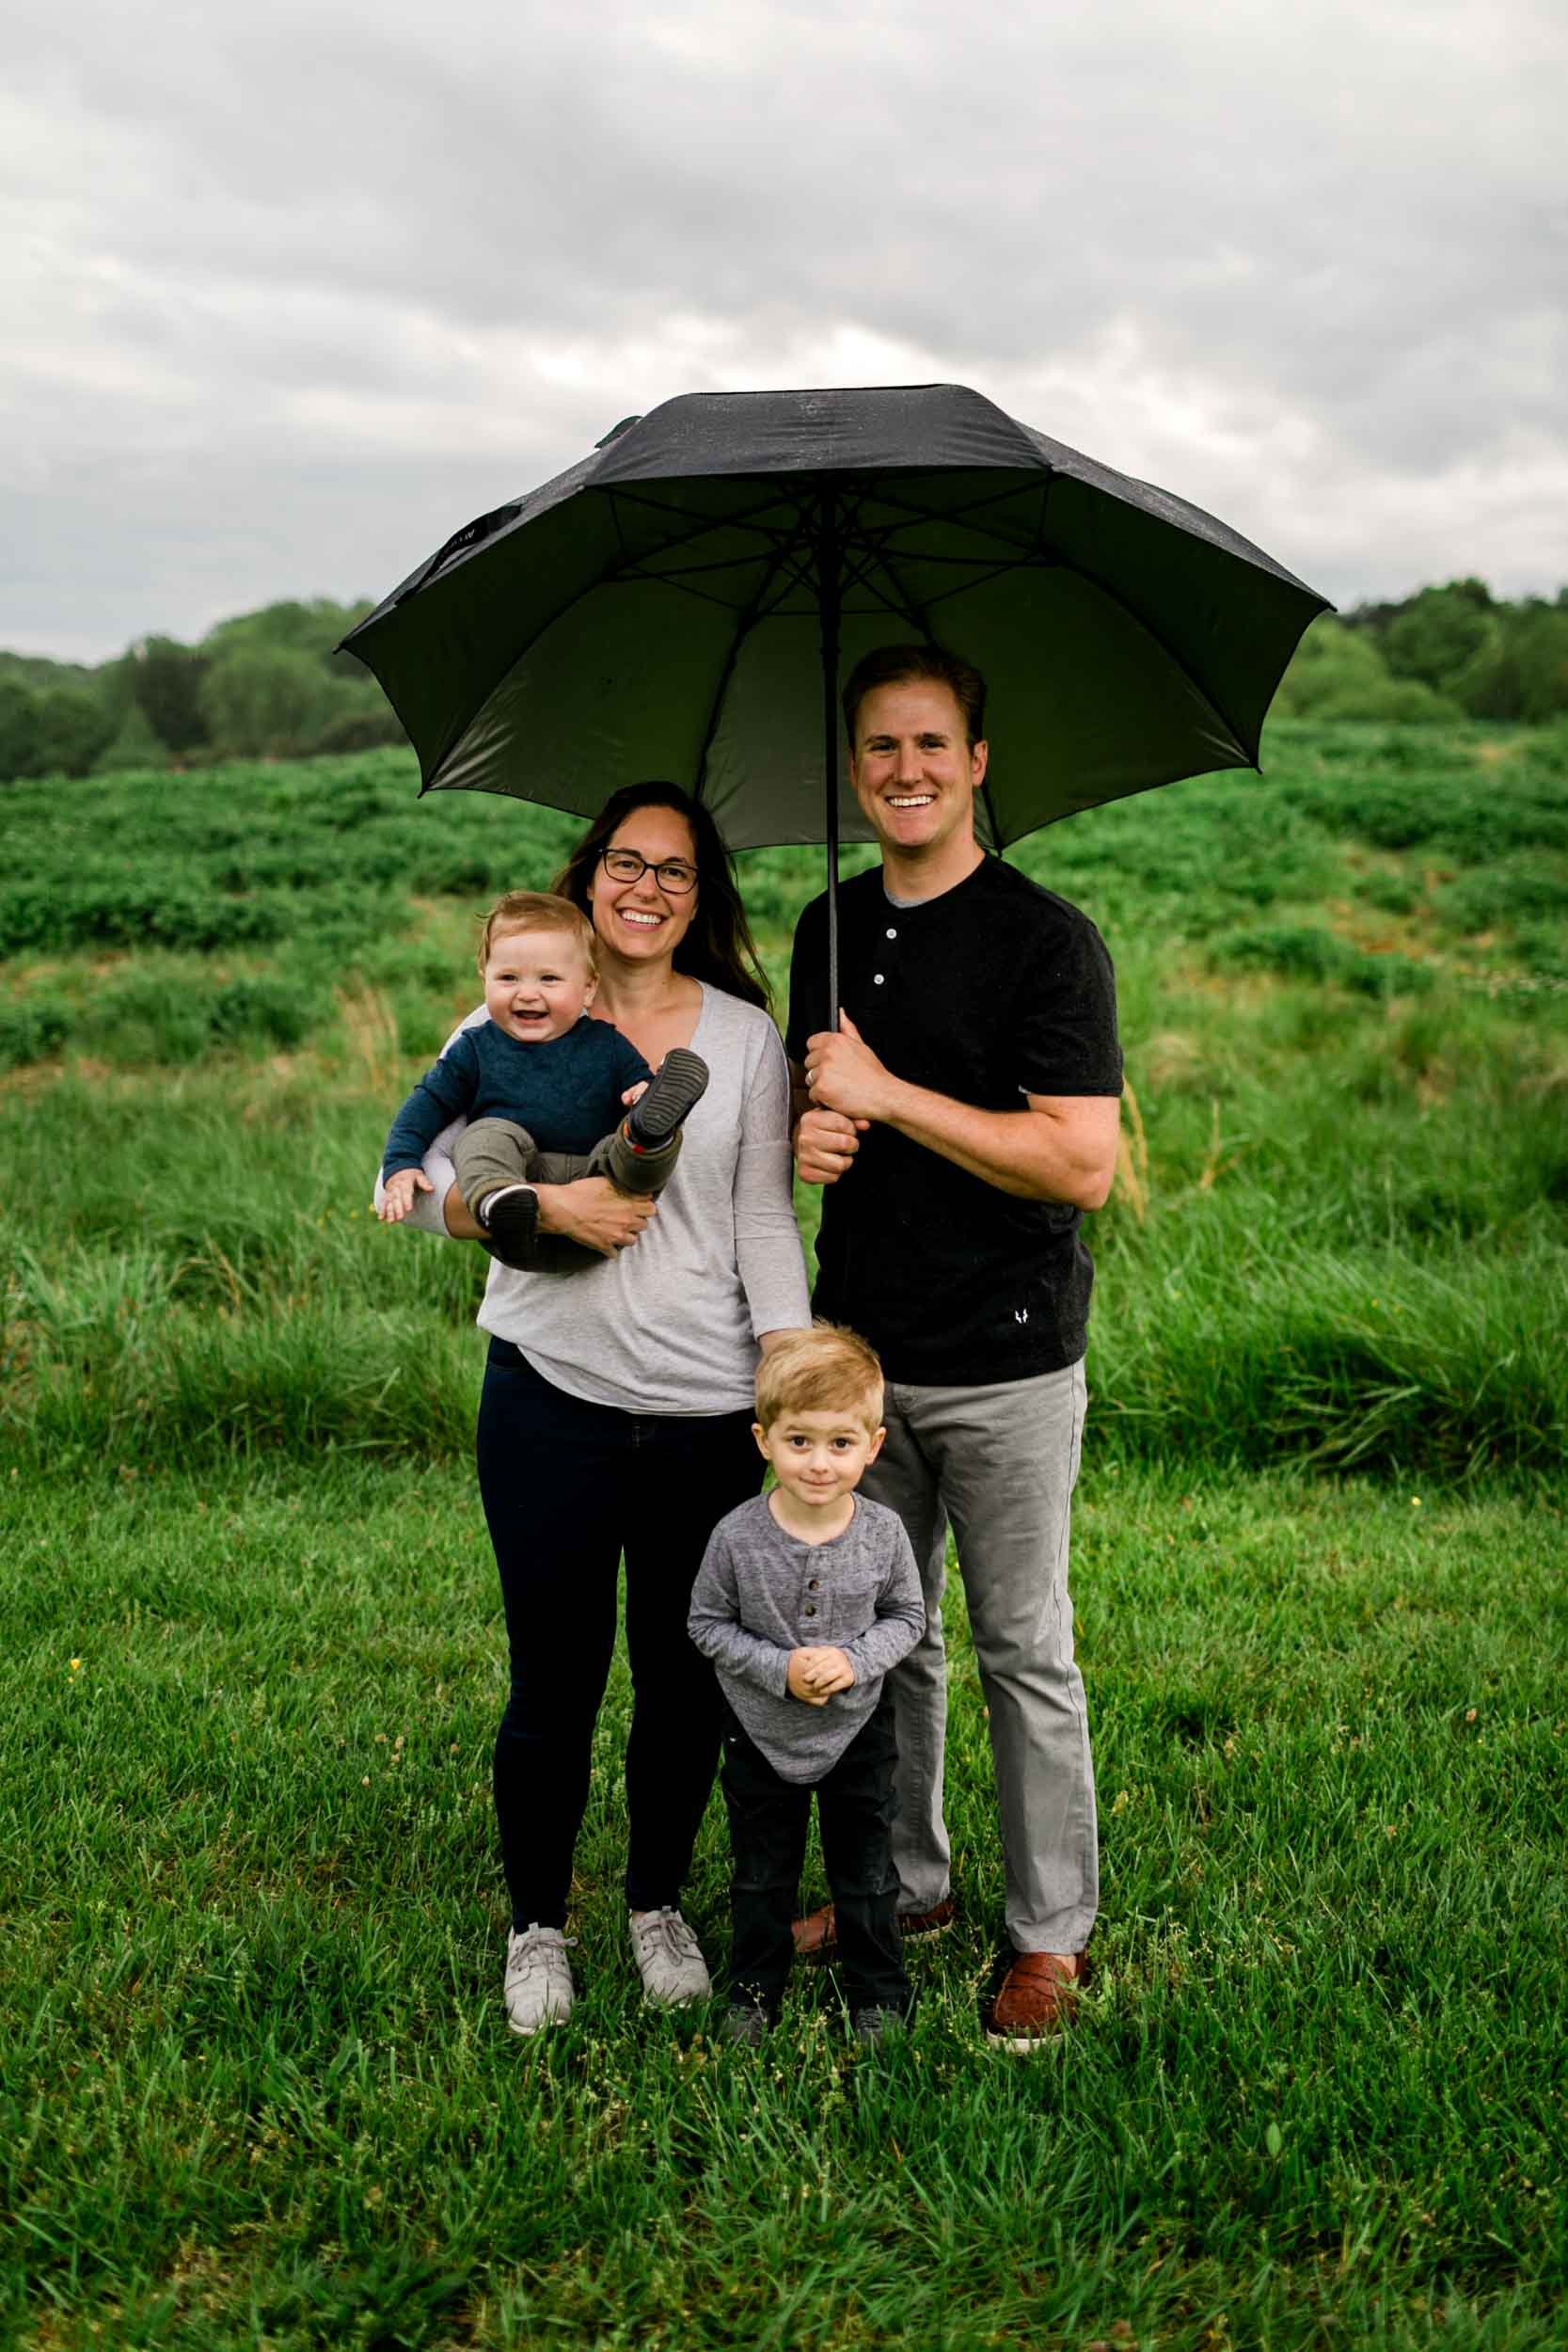 Outdoor spring family portrait | Family holding umbrella during rain | Raleigh Family Photographer | By G. Lin Photography